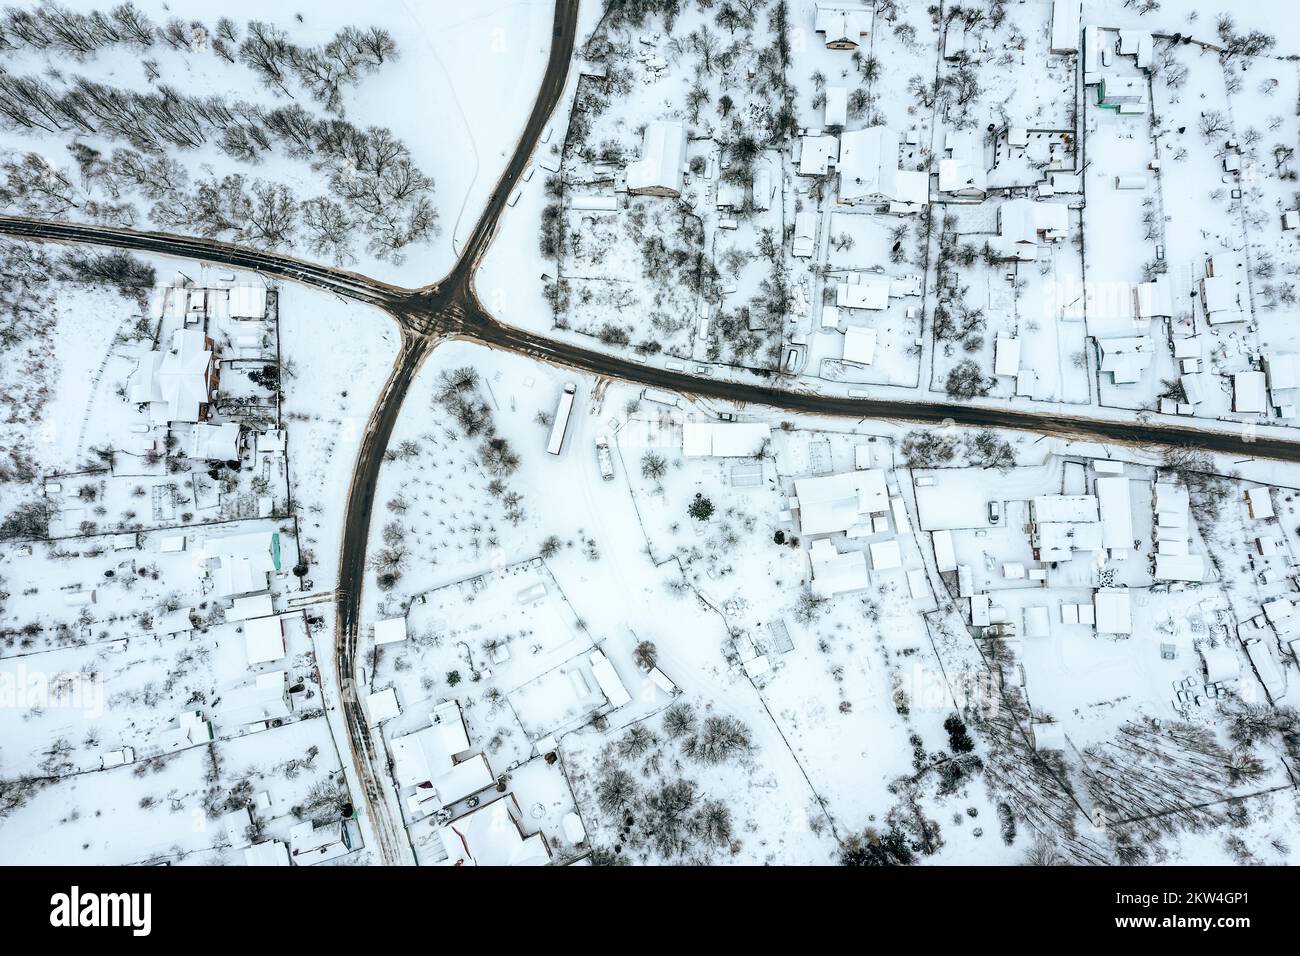 aerial drone photo looking down onto the rooftops of snow-covered suburban district Stock Photo